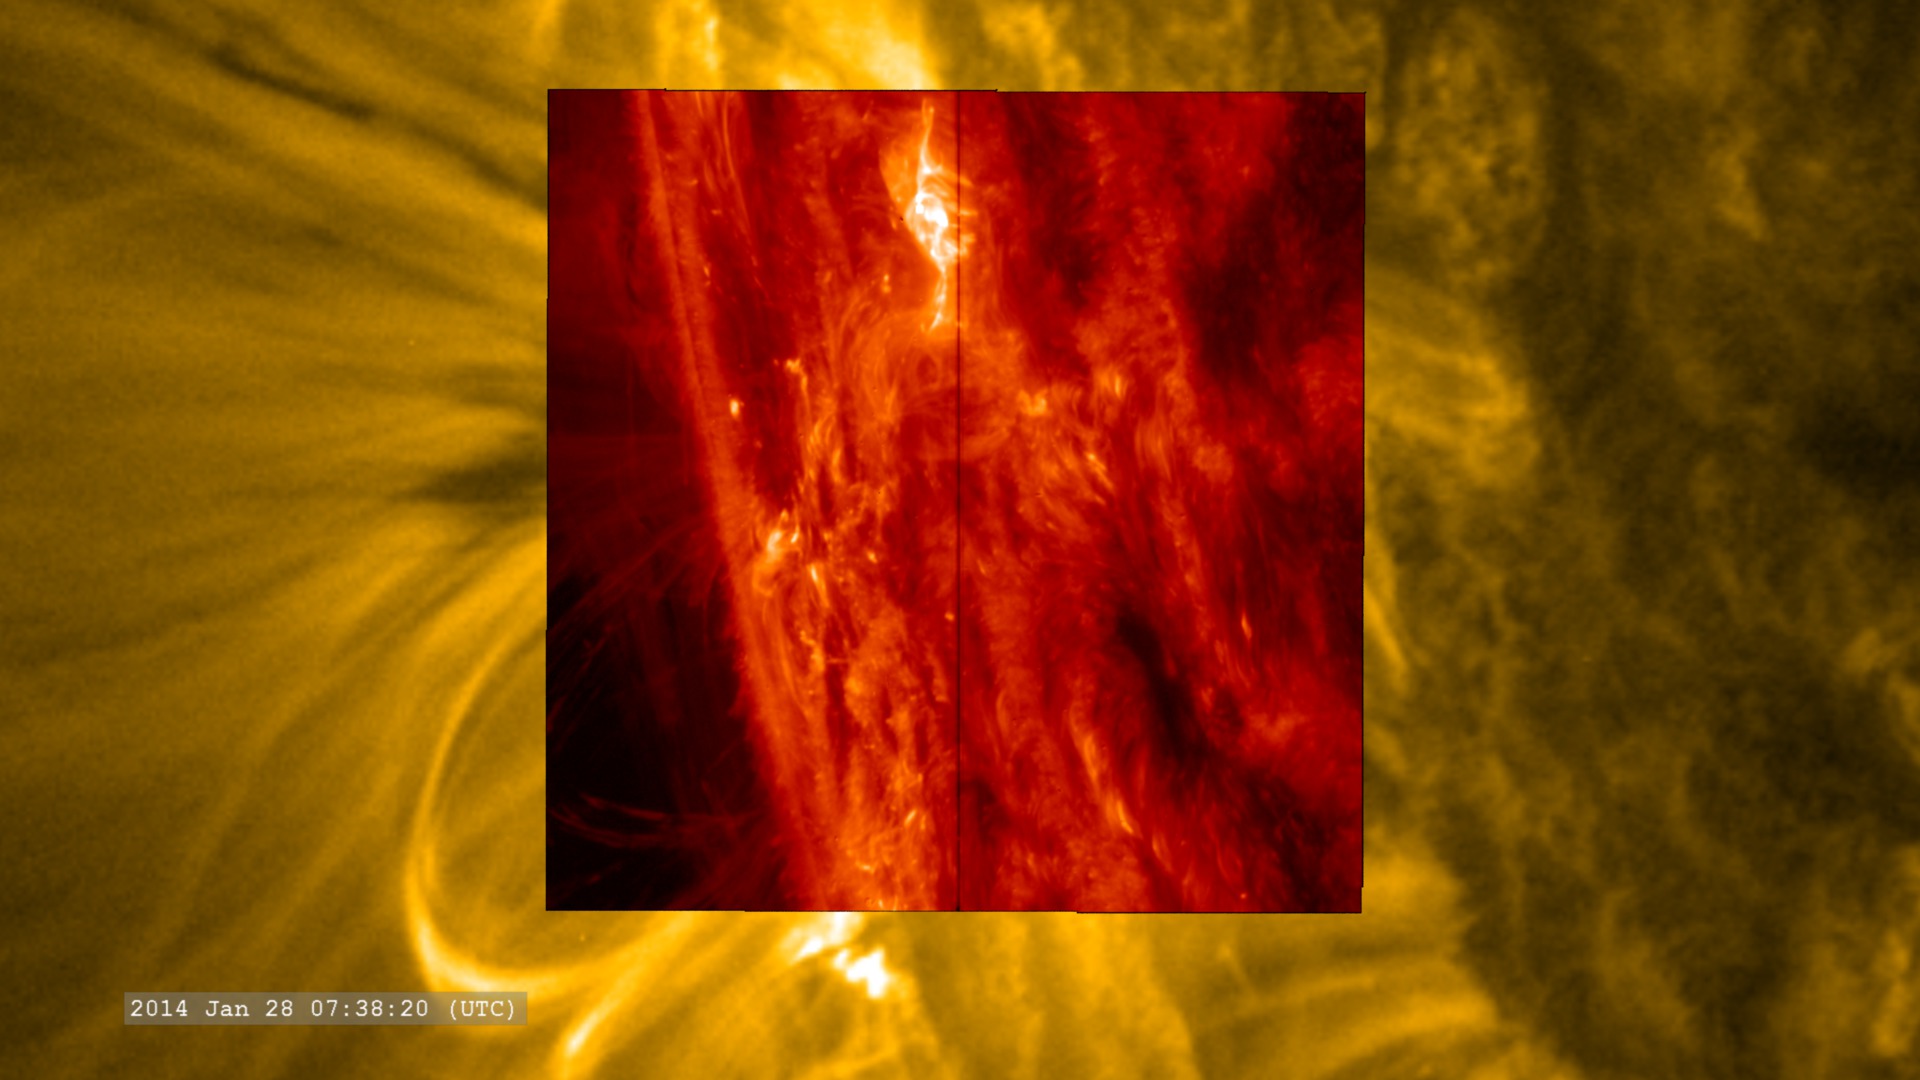 Zoom in combining SDO imagery at 17.1 nm and IRIS/SJI at 133nm.